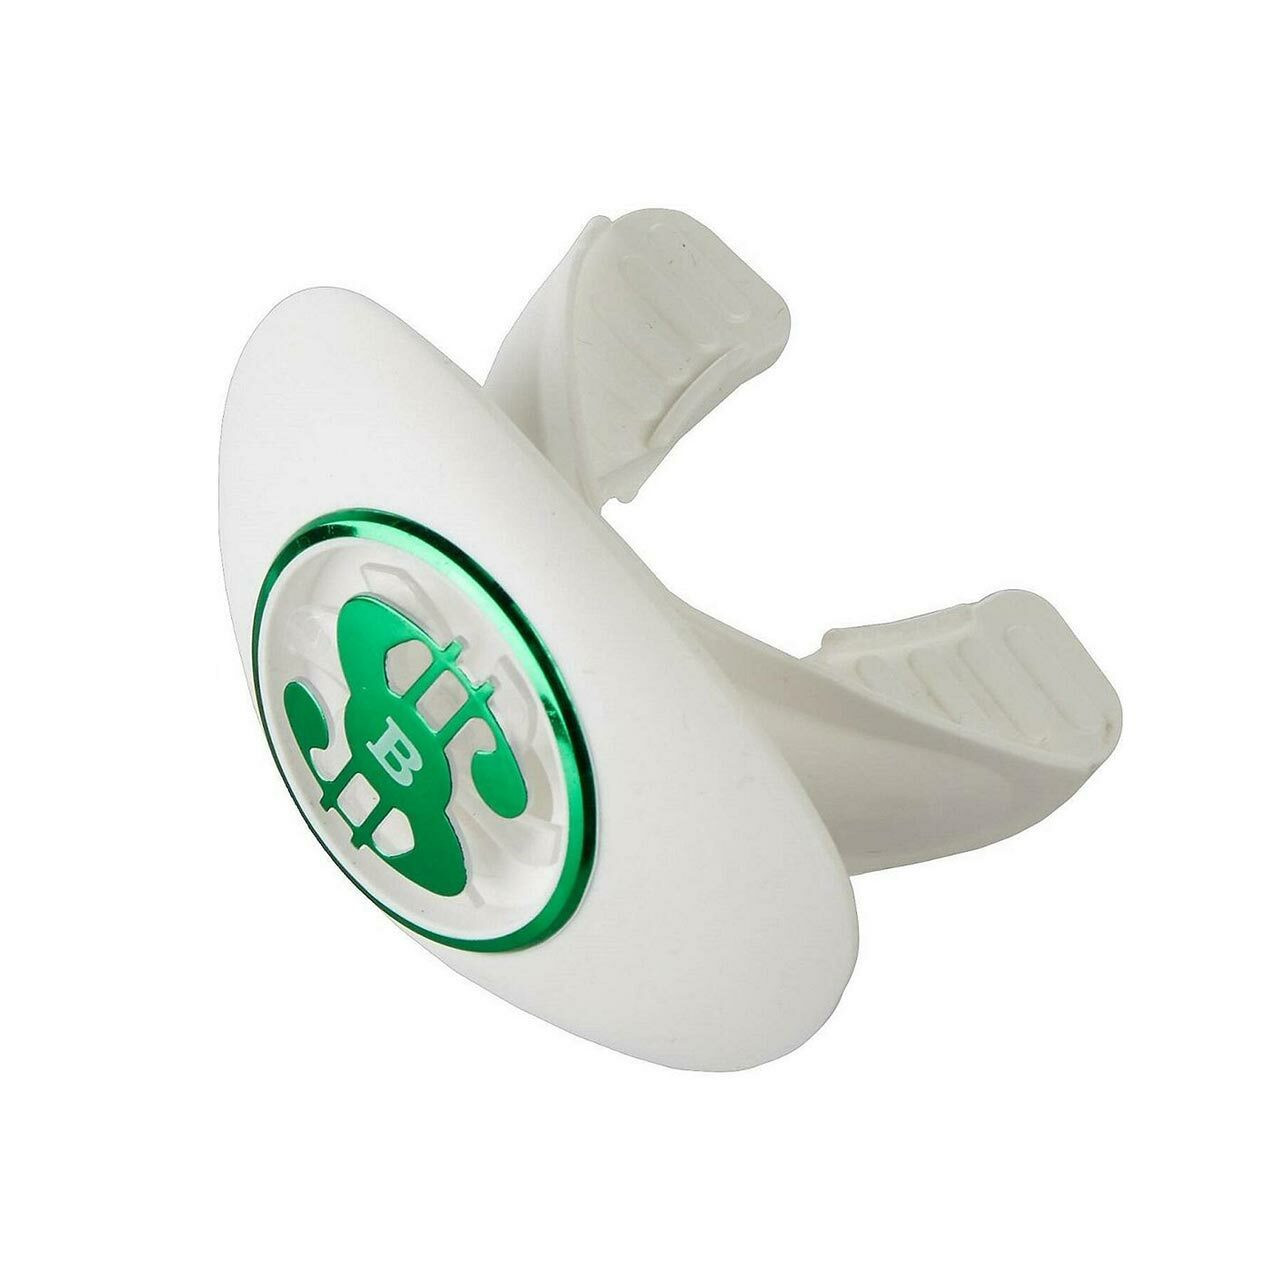 They're gonna sell tons of these spinner mouthguards because of